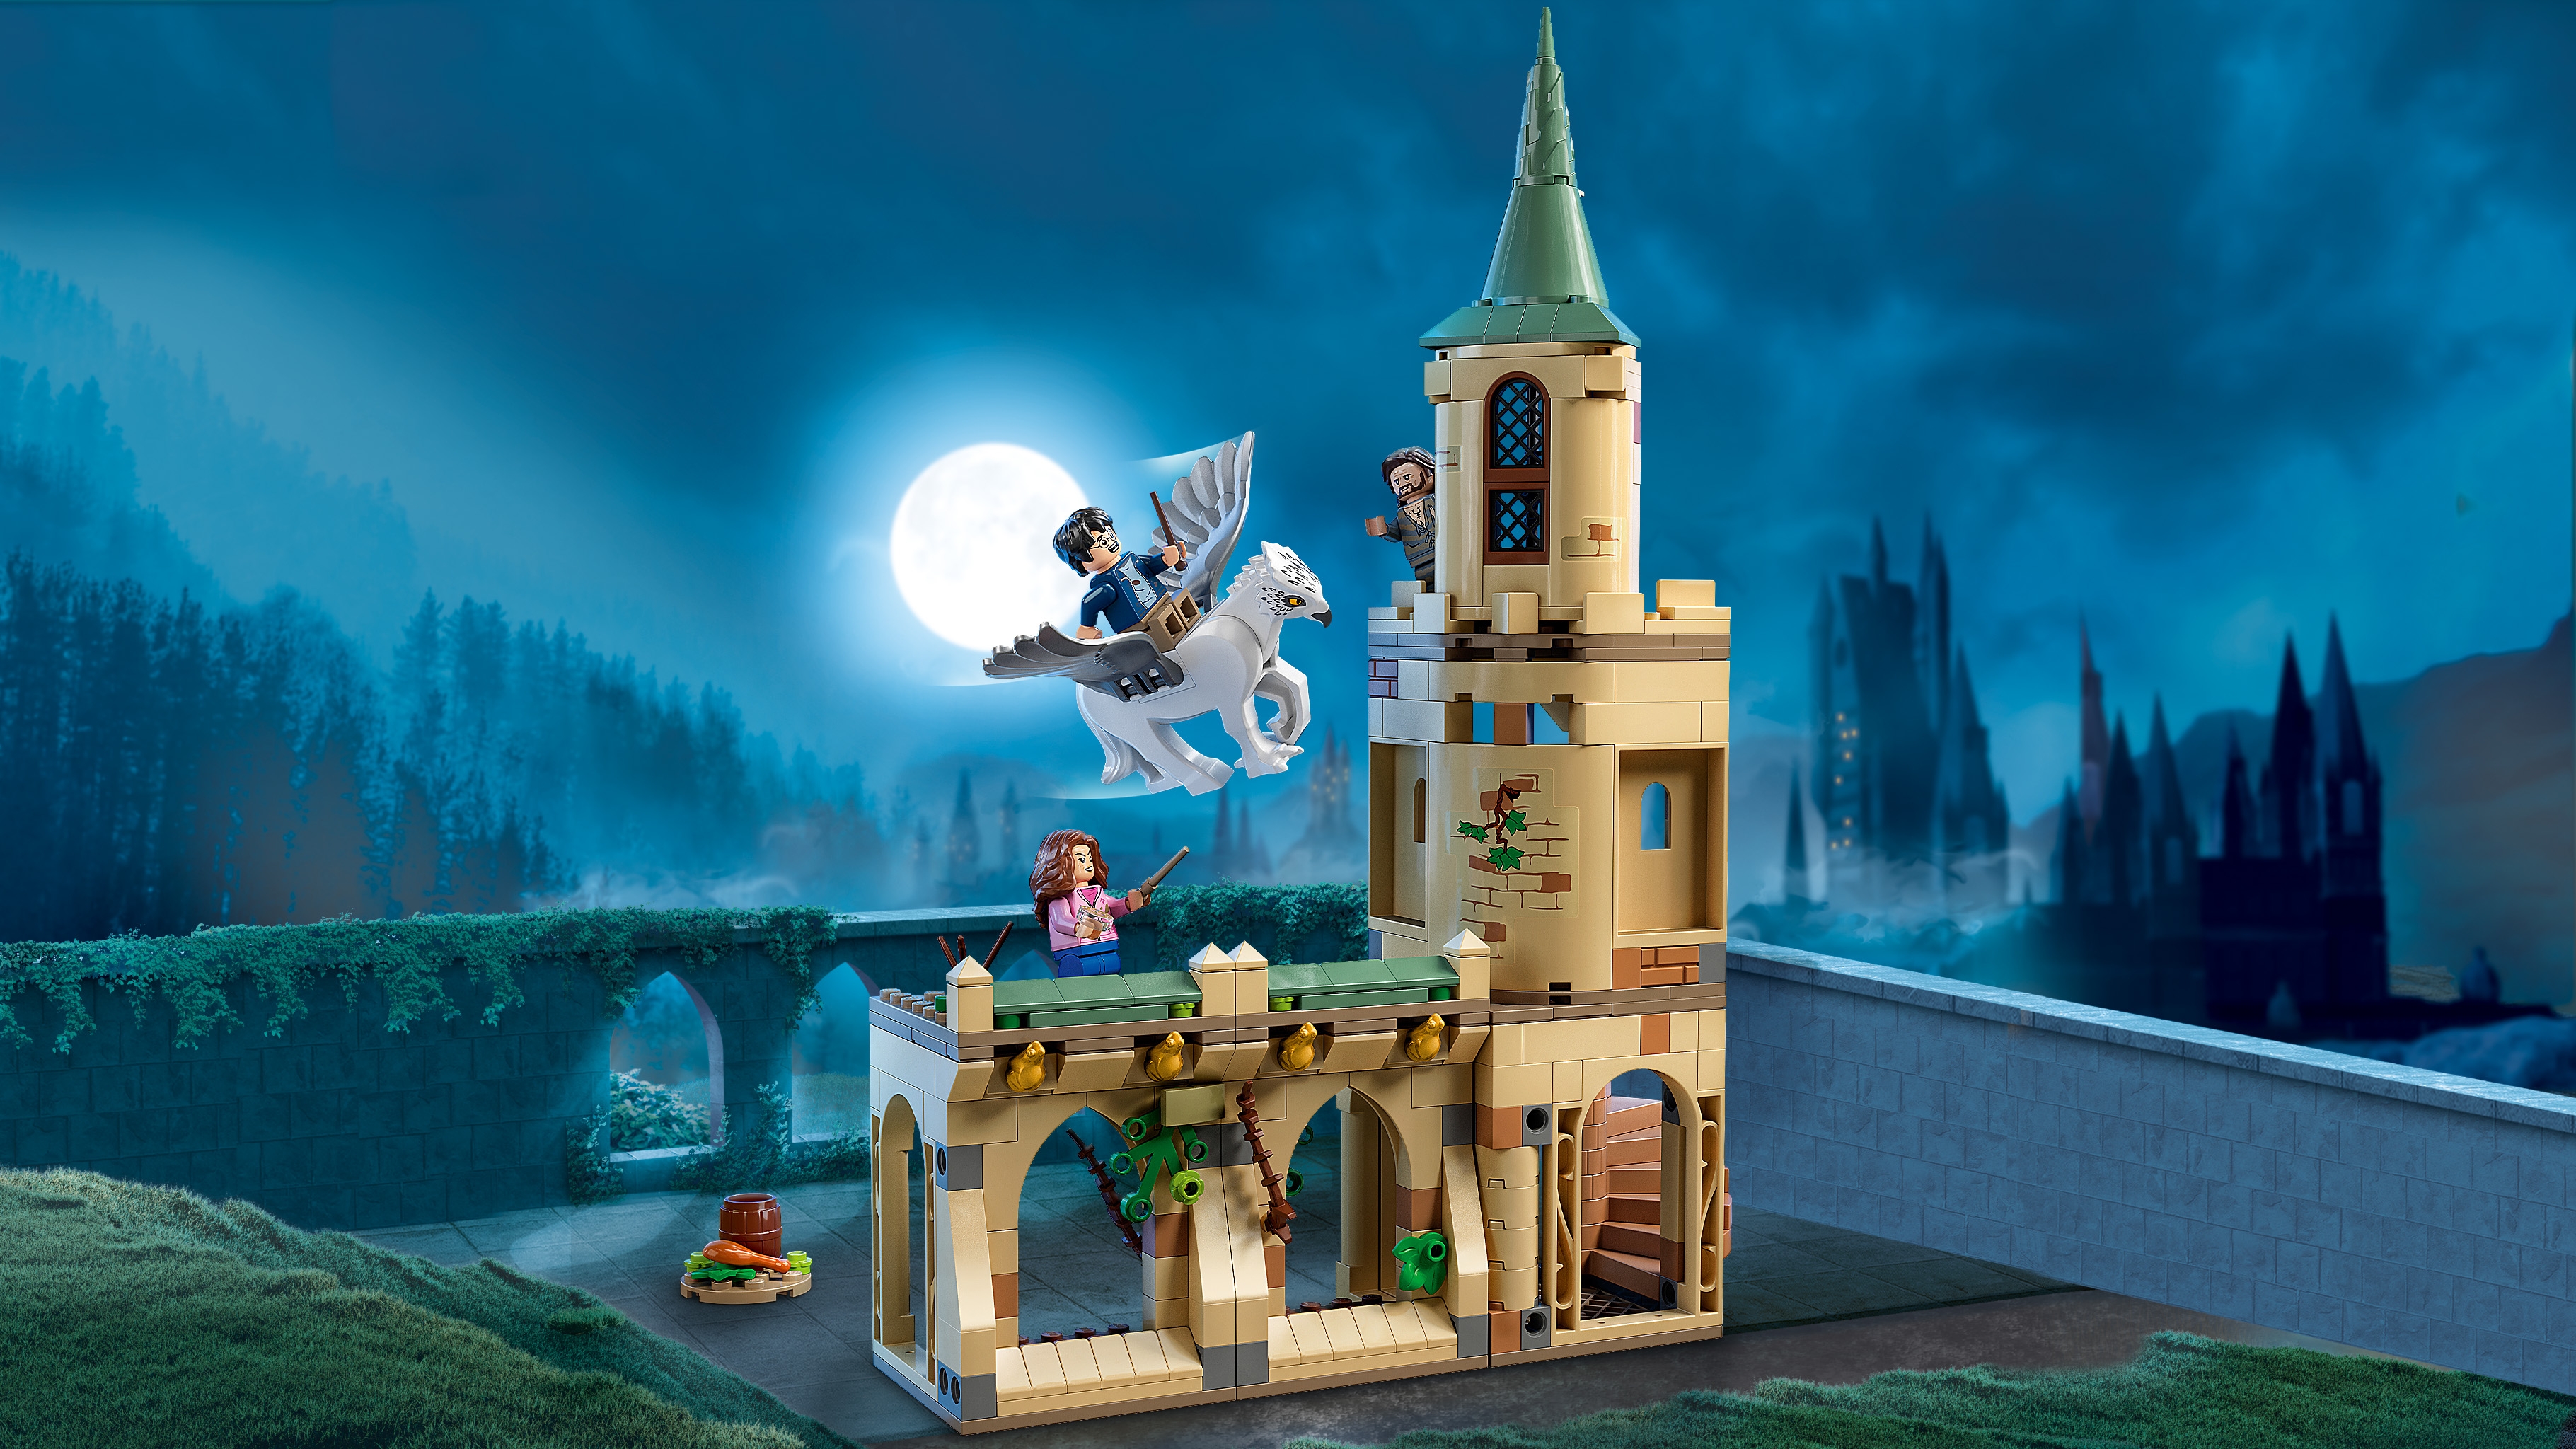 LEGO Harry Potter Hogwarts: Room of Requirement Building Set 76413 Castle  Building Toy from Harry Potter Movie Featuring Harry, Hermione and Ron Mini